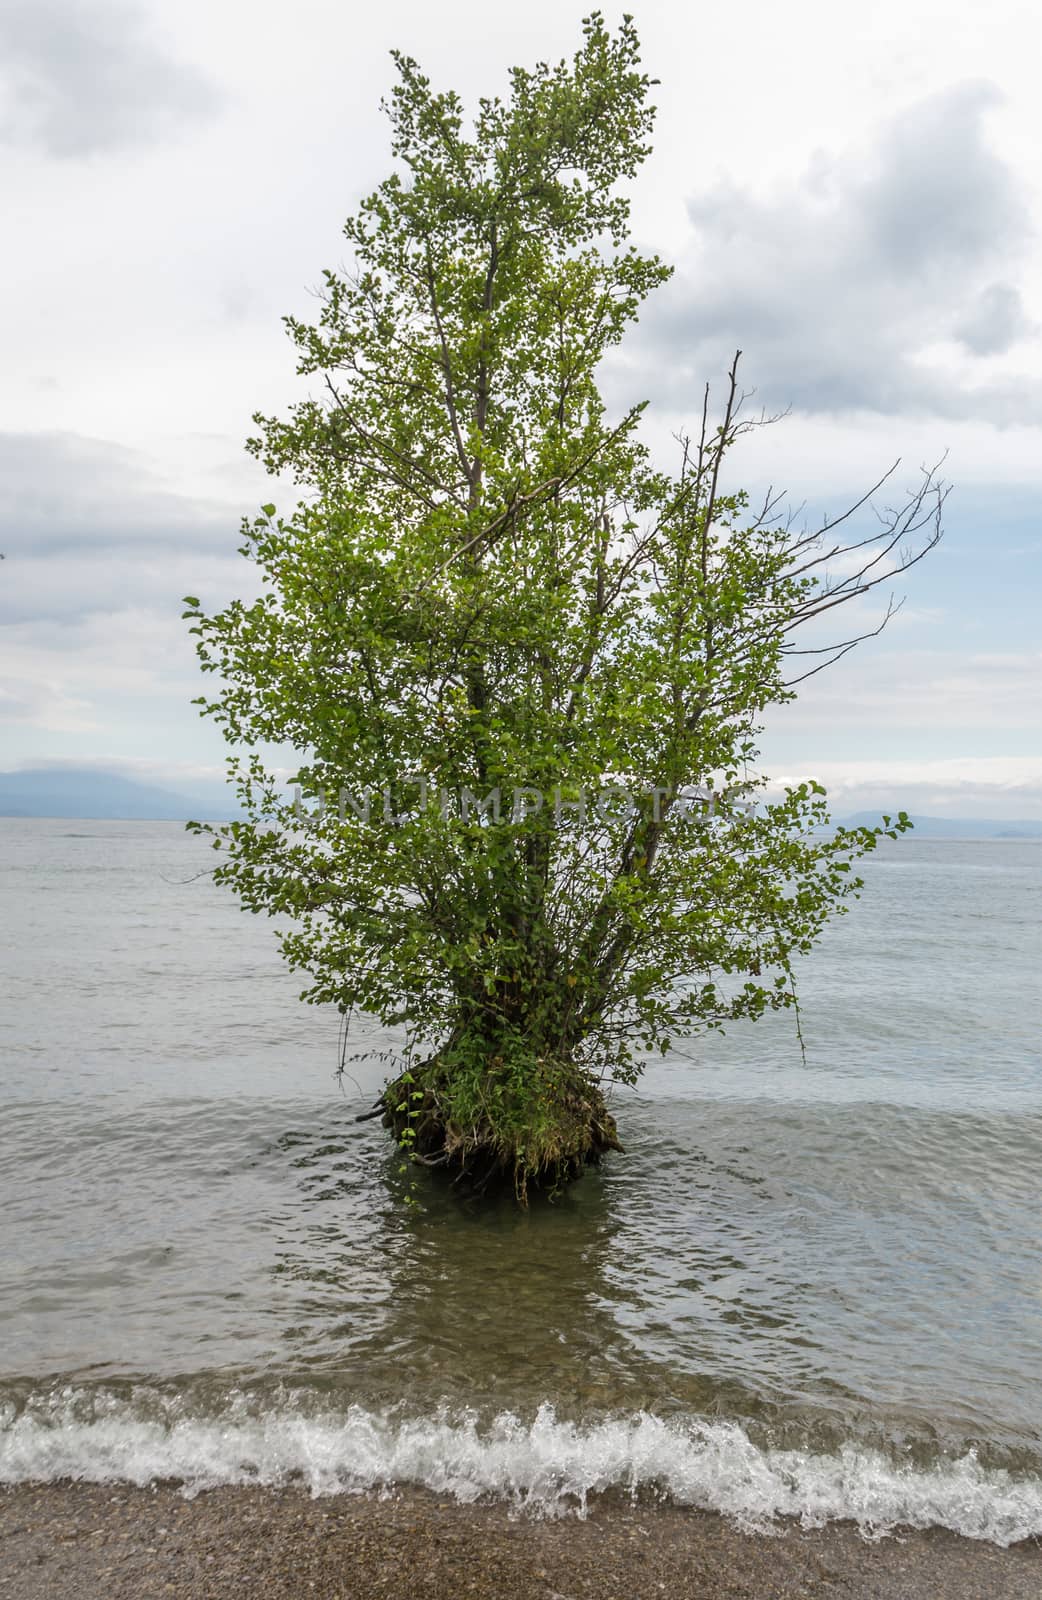 Tree grown in lake, on cloudy day